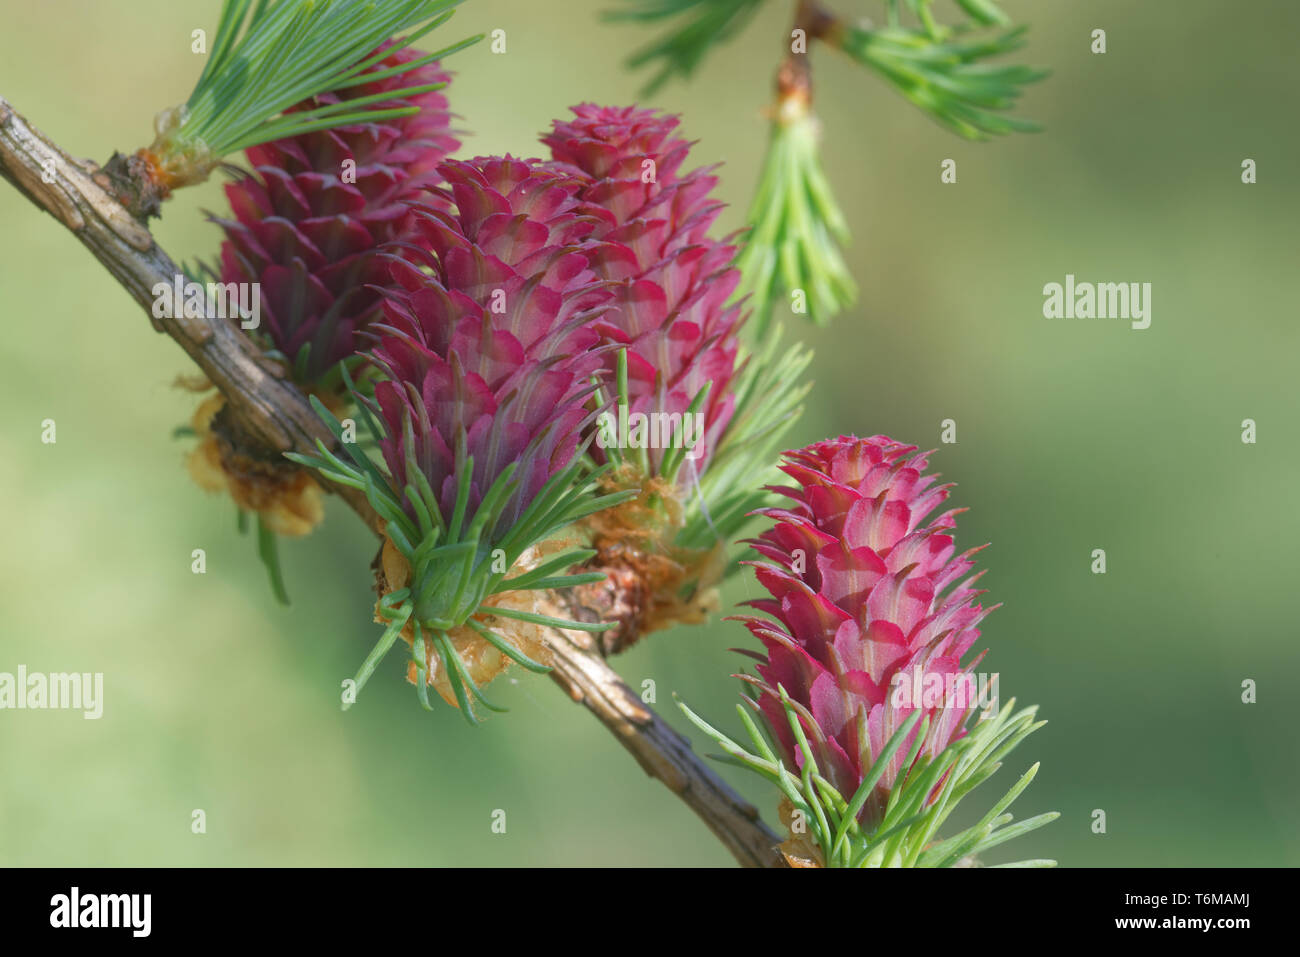 Ovulate cones of larch tree in spring, beginning of May. Stock Photo